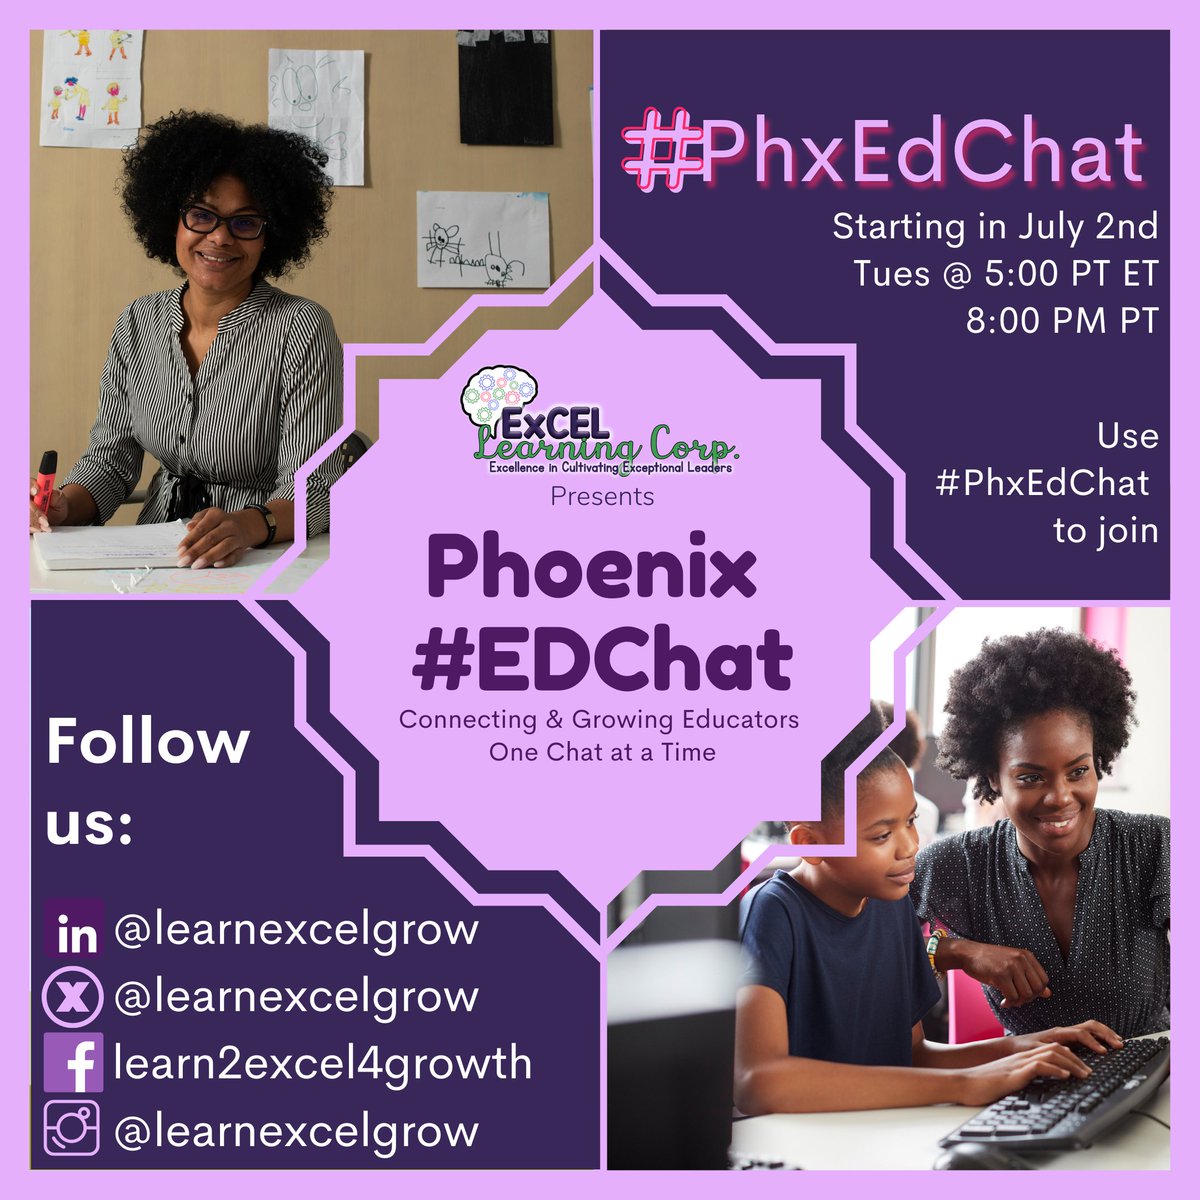 Seeking advice or mentorship in your teaching journey? Join #PhxEdChat and tap into a supportive network of educators. #LearningCommunity #ParentEngagement #StudentVoice #PhxEdChat #PhoenixEducators